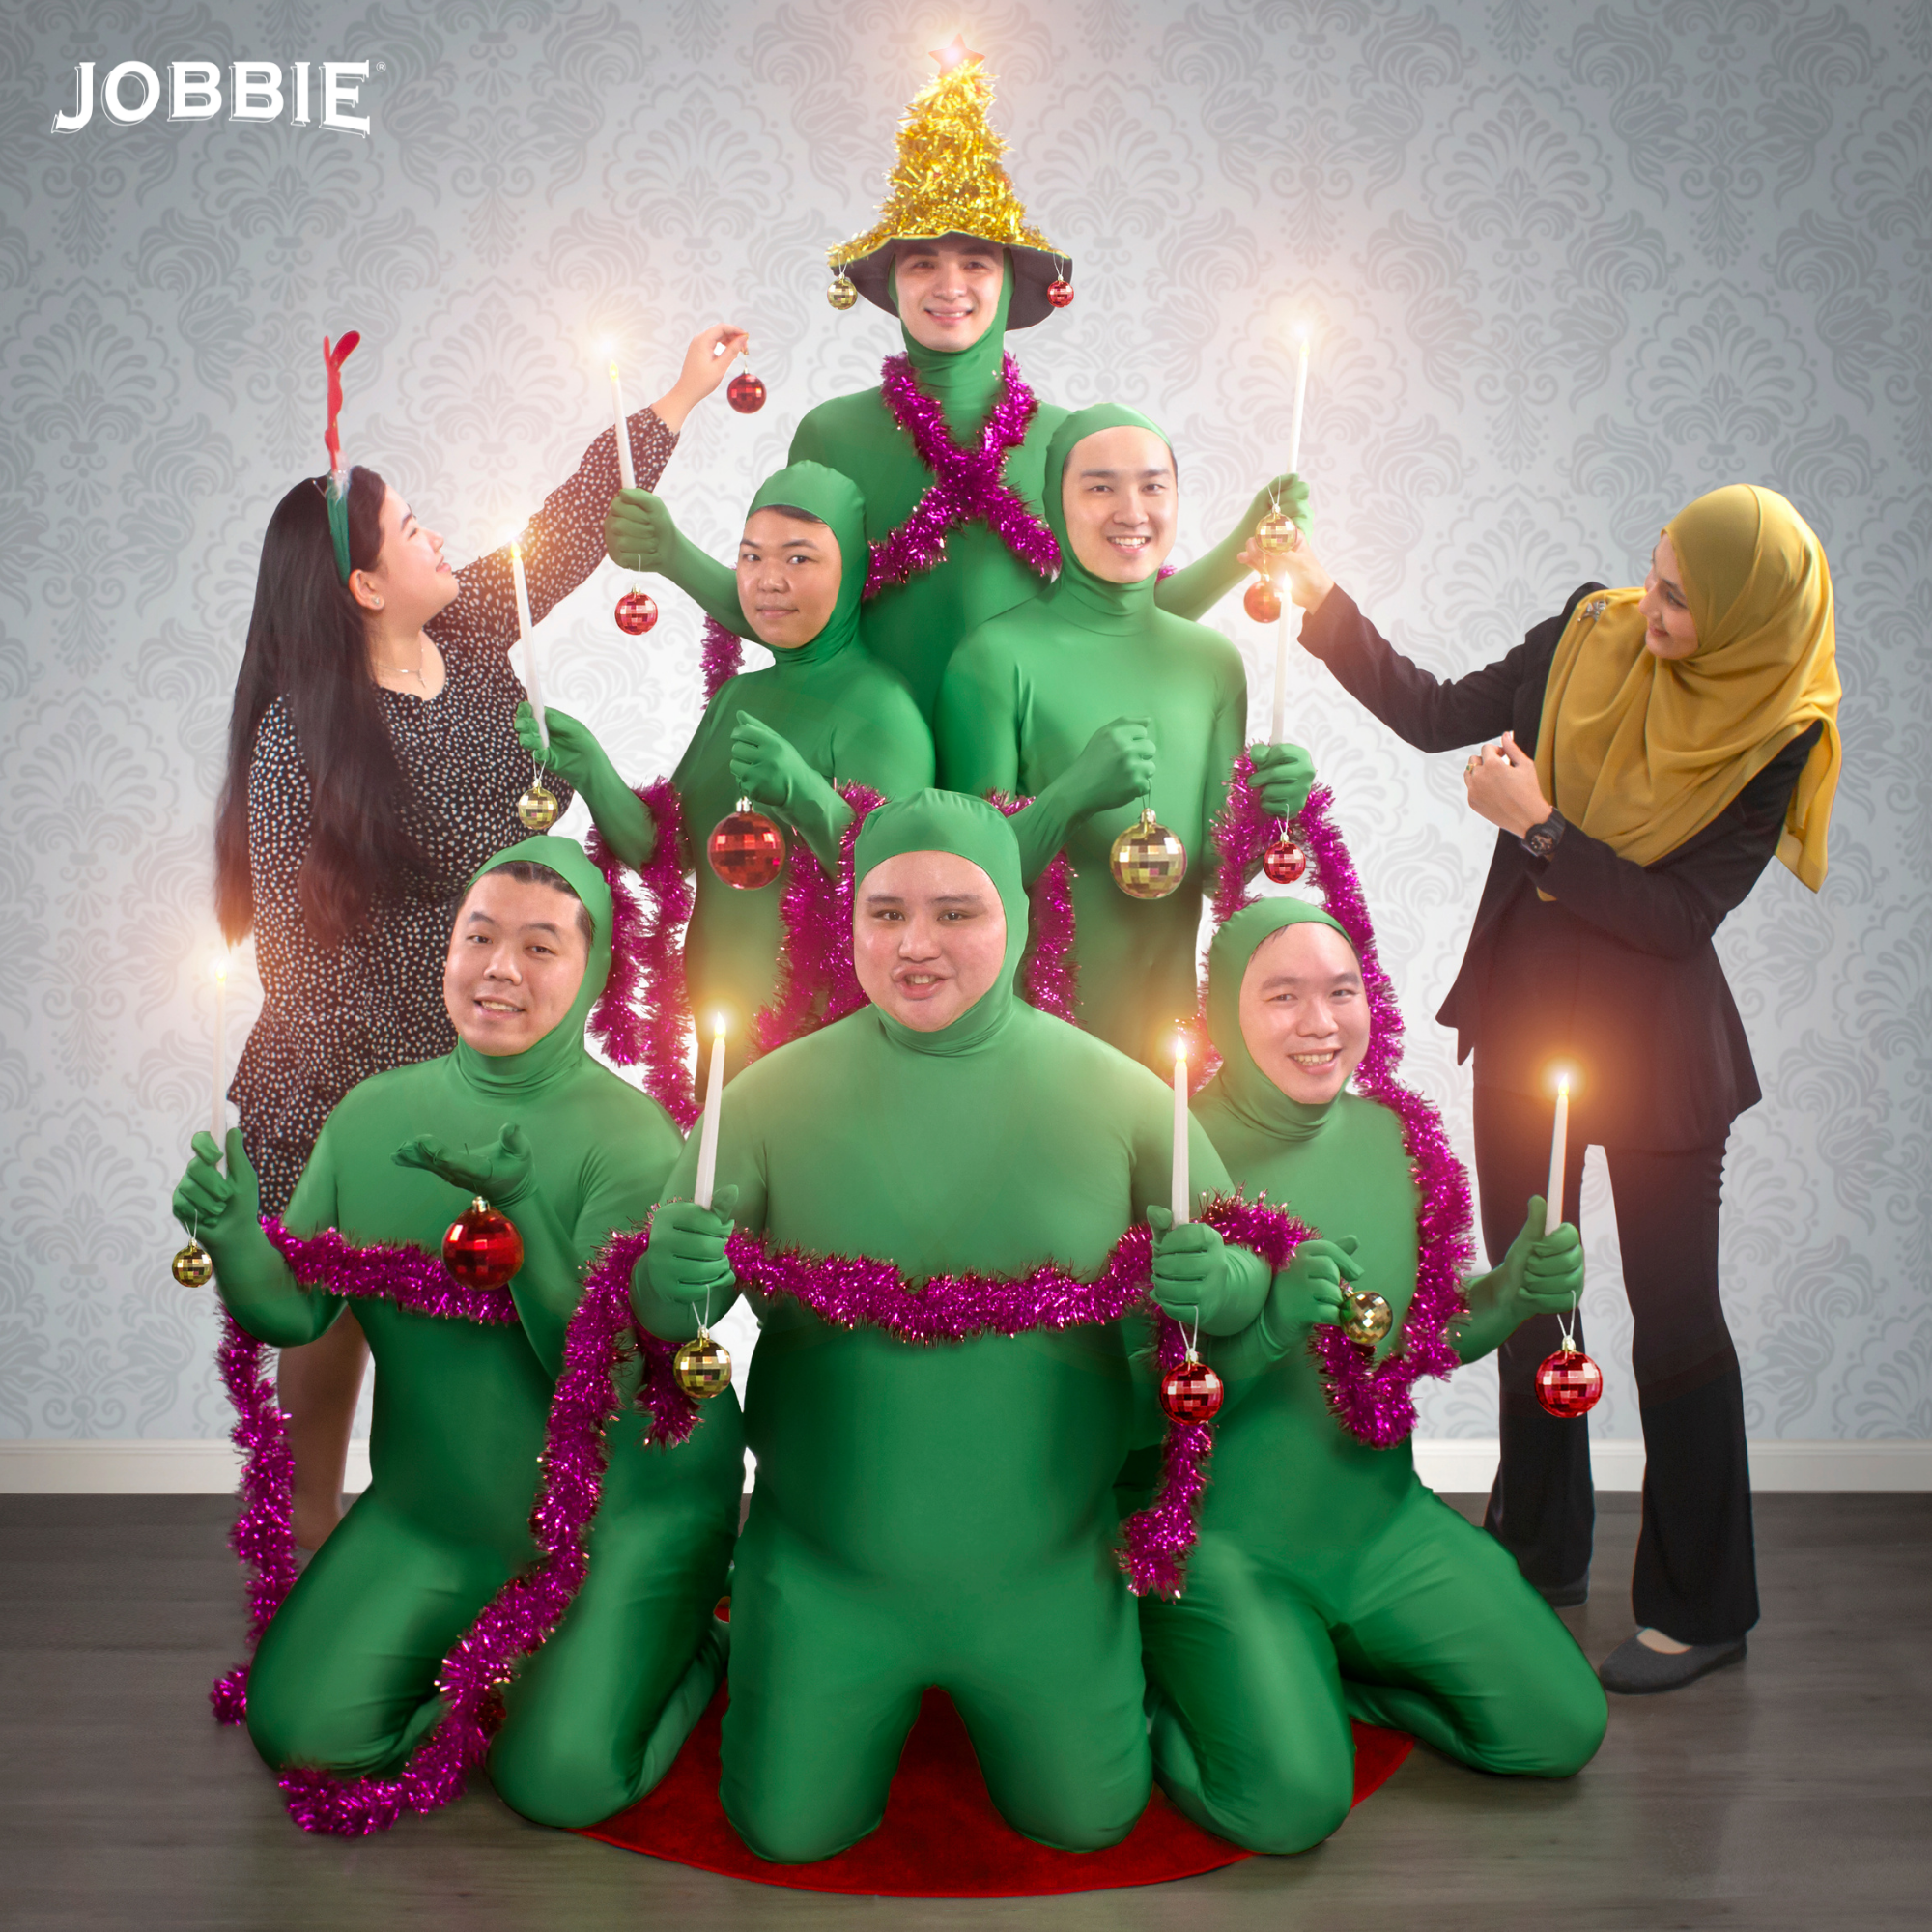 JOBBIE Christmas Tree 2021 Limited Edition Packaging